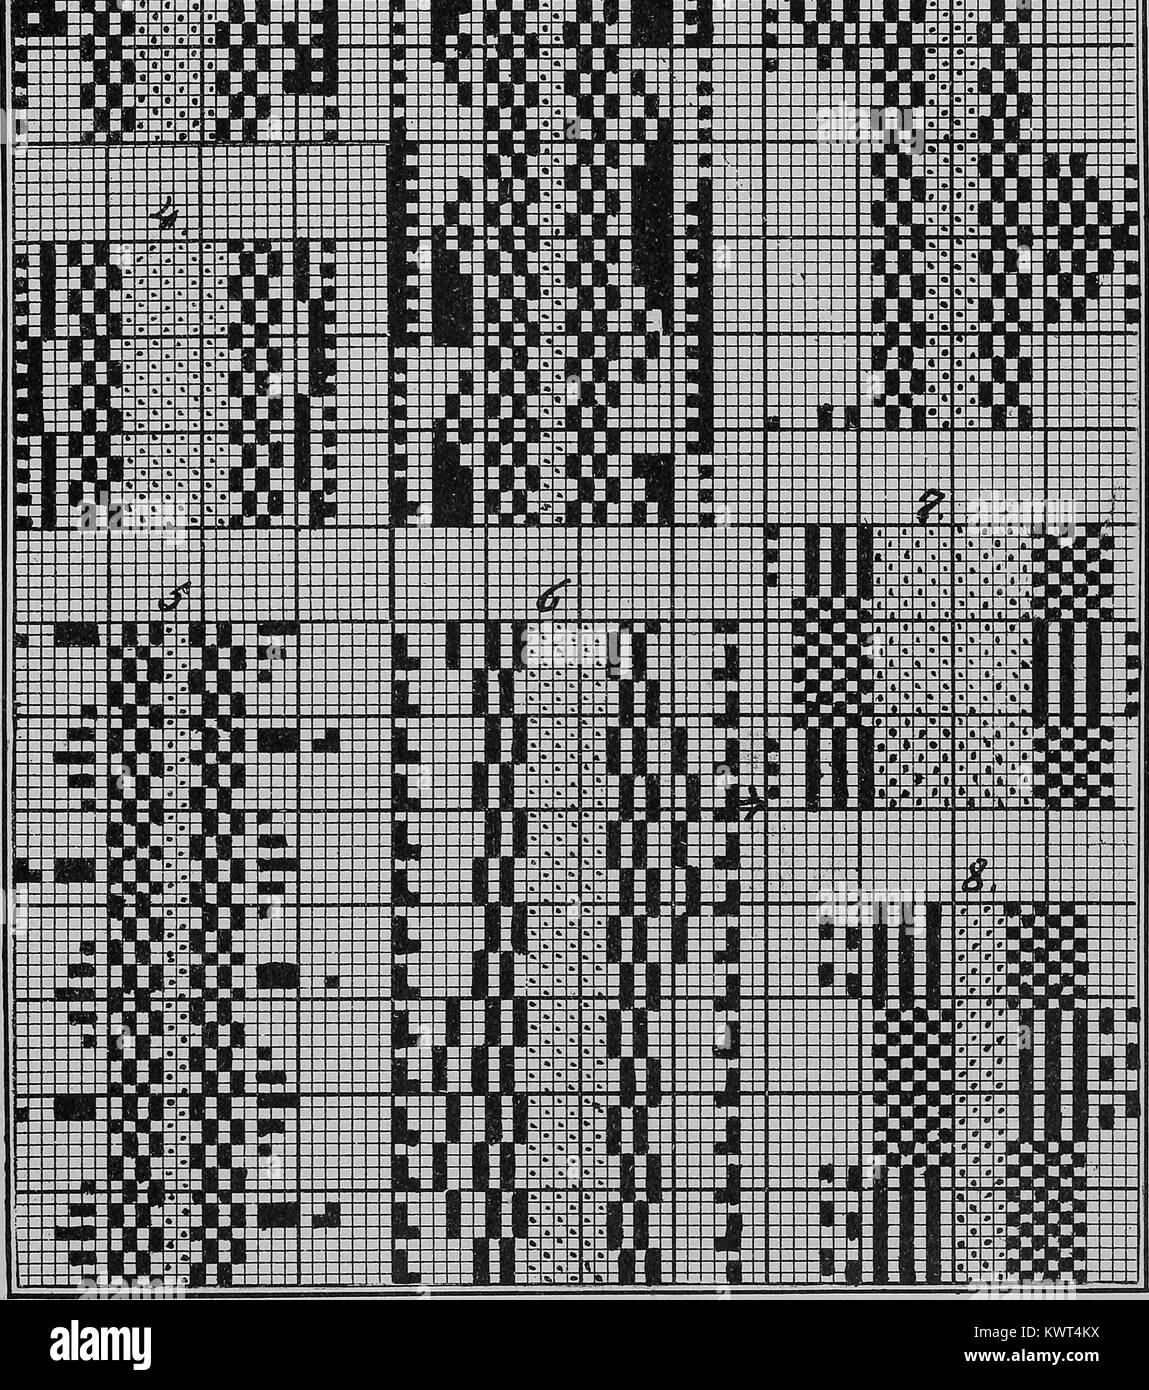 Printed punch card used to program a Jacquard Loom, an early example of industrial automation; Jacquard looms use the patterns punched on a card to automatically weave complex fabric designs, 1898. Courtesy Internet Archive. Stock Photo